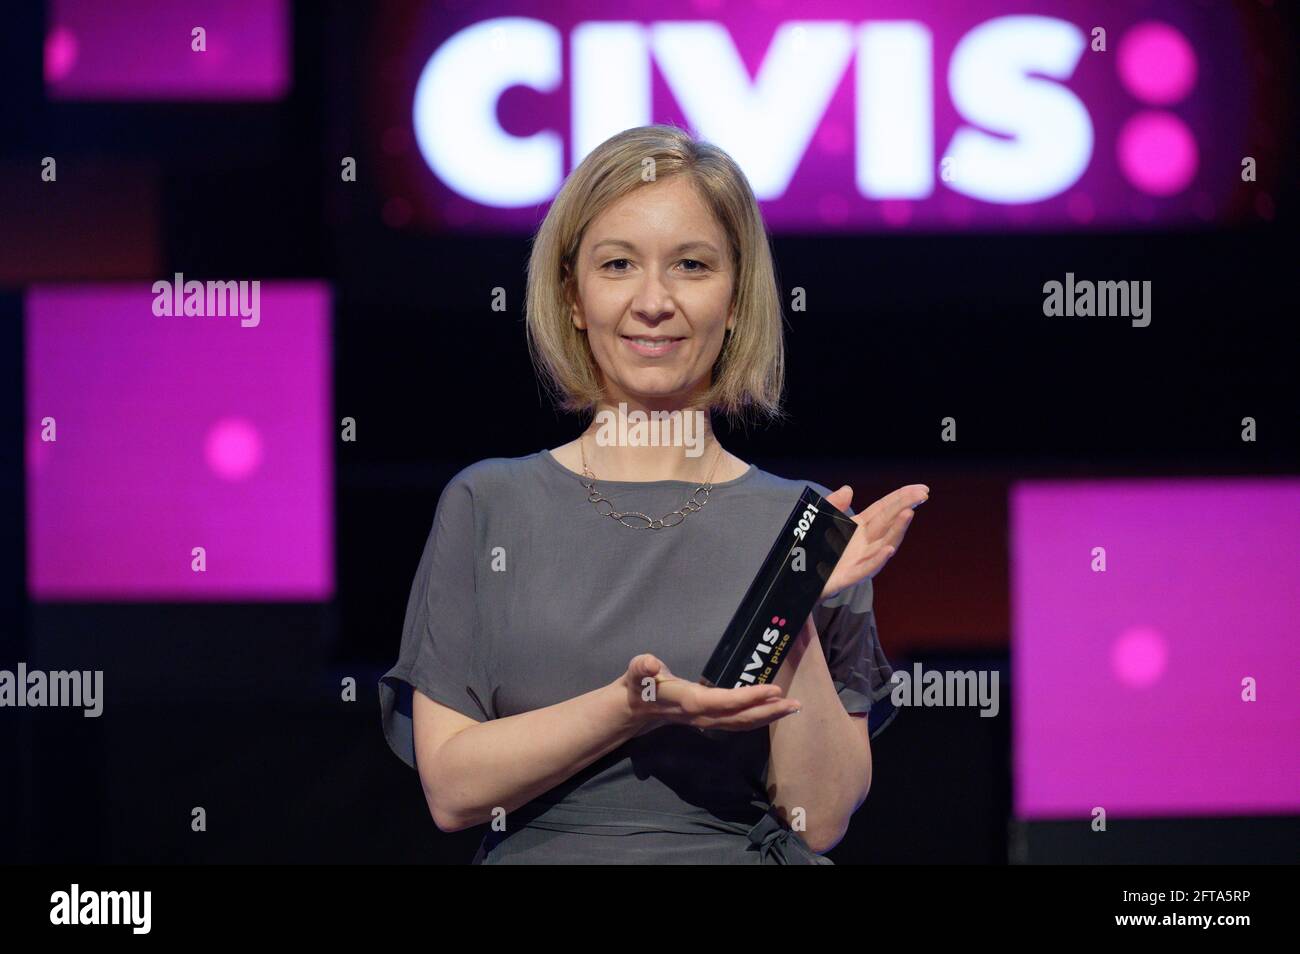 Cologne, Germany. 21st May, 2021. Author Claudia Gschweit is pleased to receive the prize in the category 'Civis Audio Award, long' for 'Wilkommen in Weikendorf' at the Civis Media Awards ceremony. Credit: Henning Kaiser/dpa/Alamy Live News Stock Photo